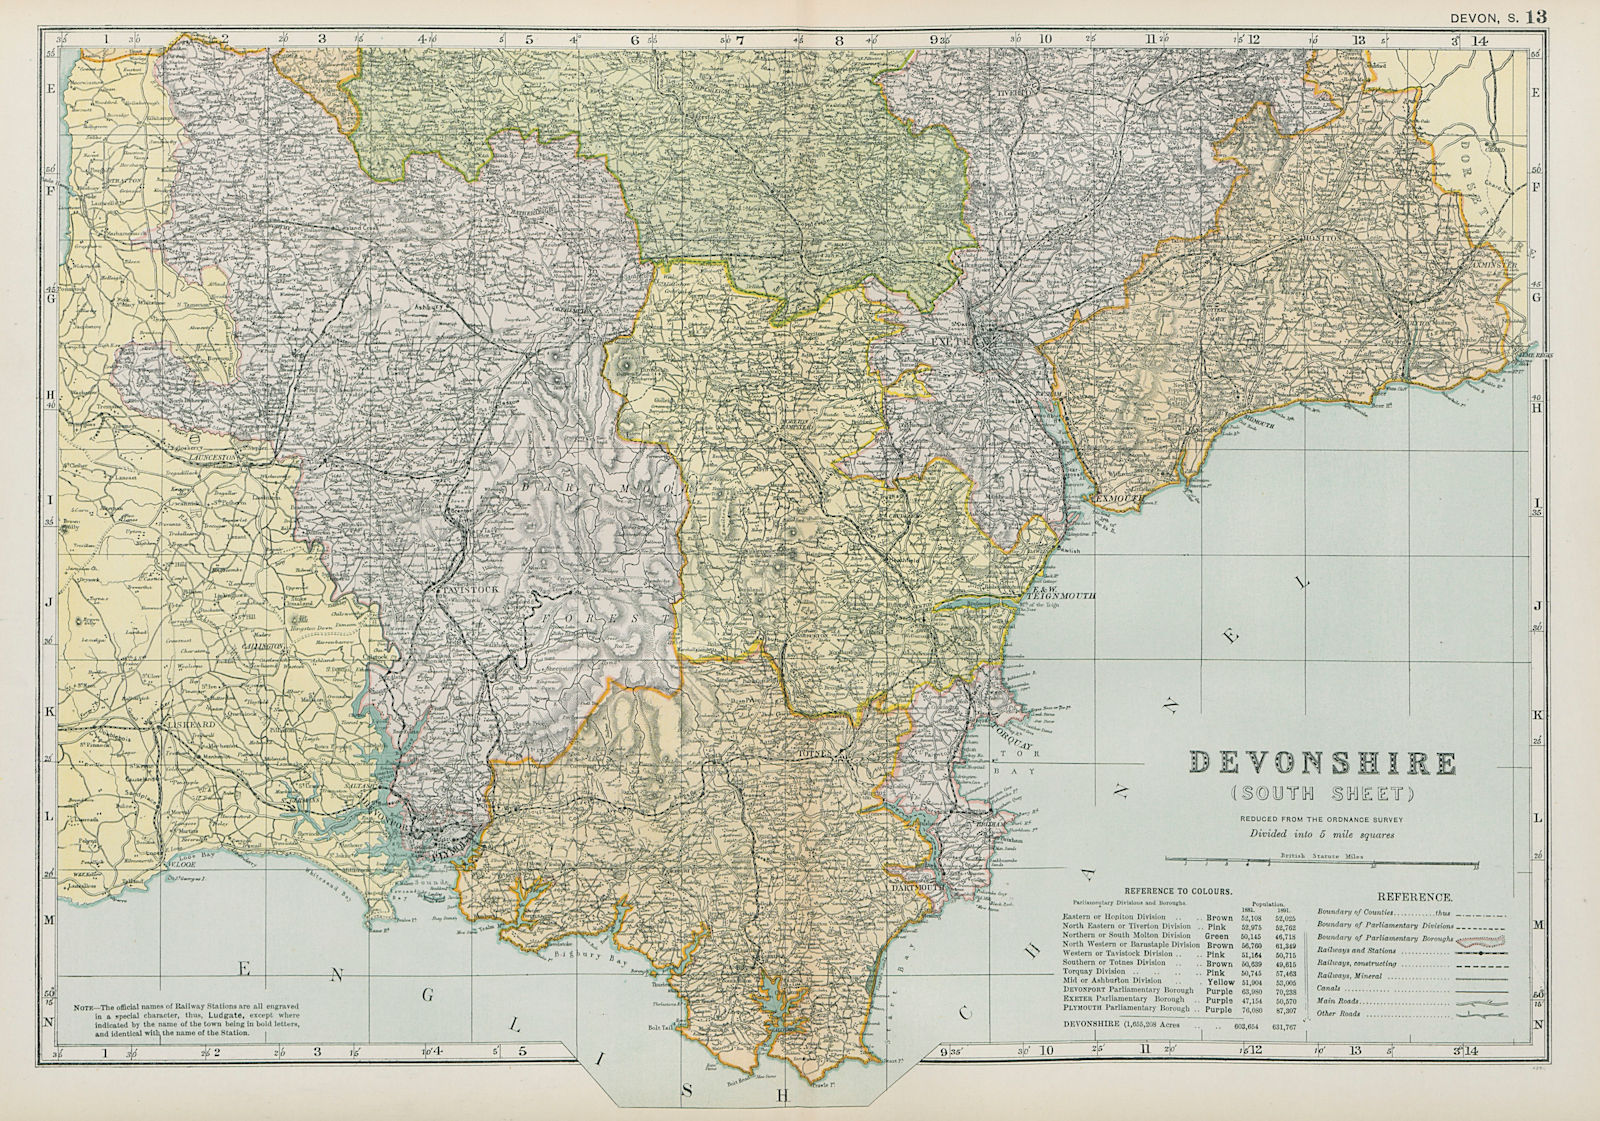 Associate Product DEVONSHIRE (SOUTH) . Parliamentary divisions. Parks. Devon. BACON 1900 old map